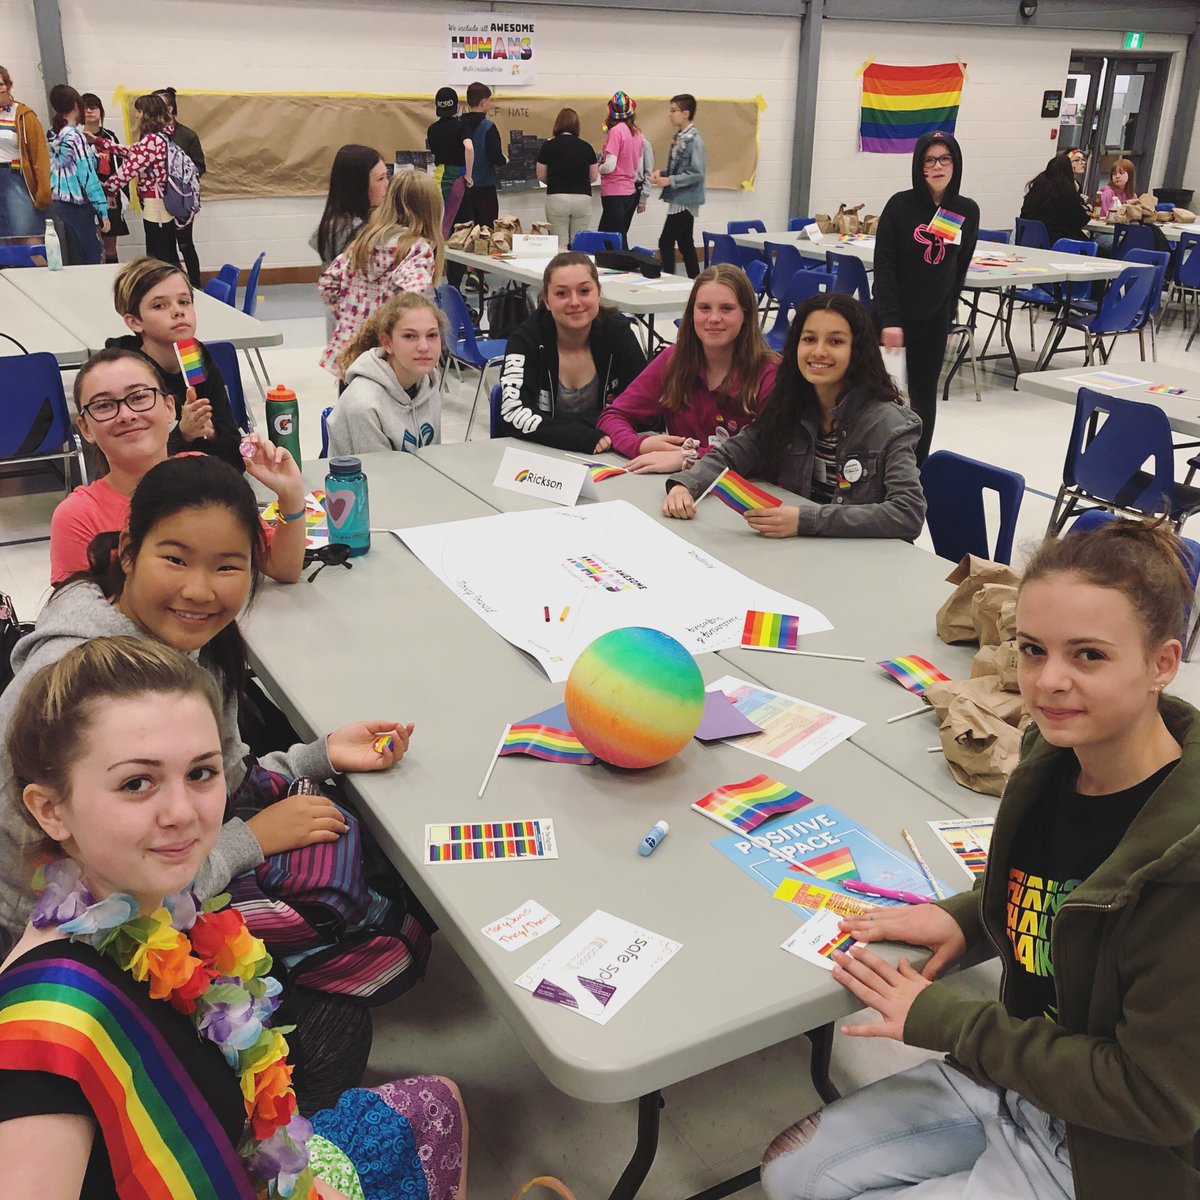 My students are ready to celebrate diversity at UGDSB Rainbow Summit! Shout out to the hard work put into this event!!!! #UGIncludesPride #loveislove #reflecting